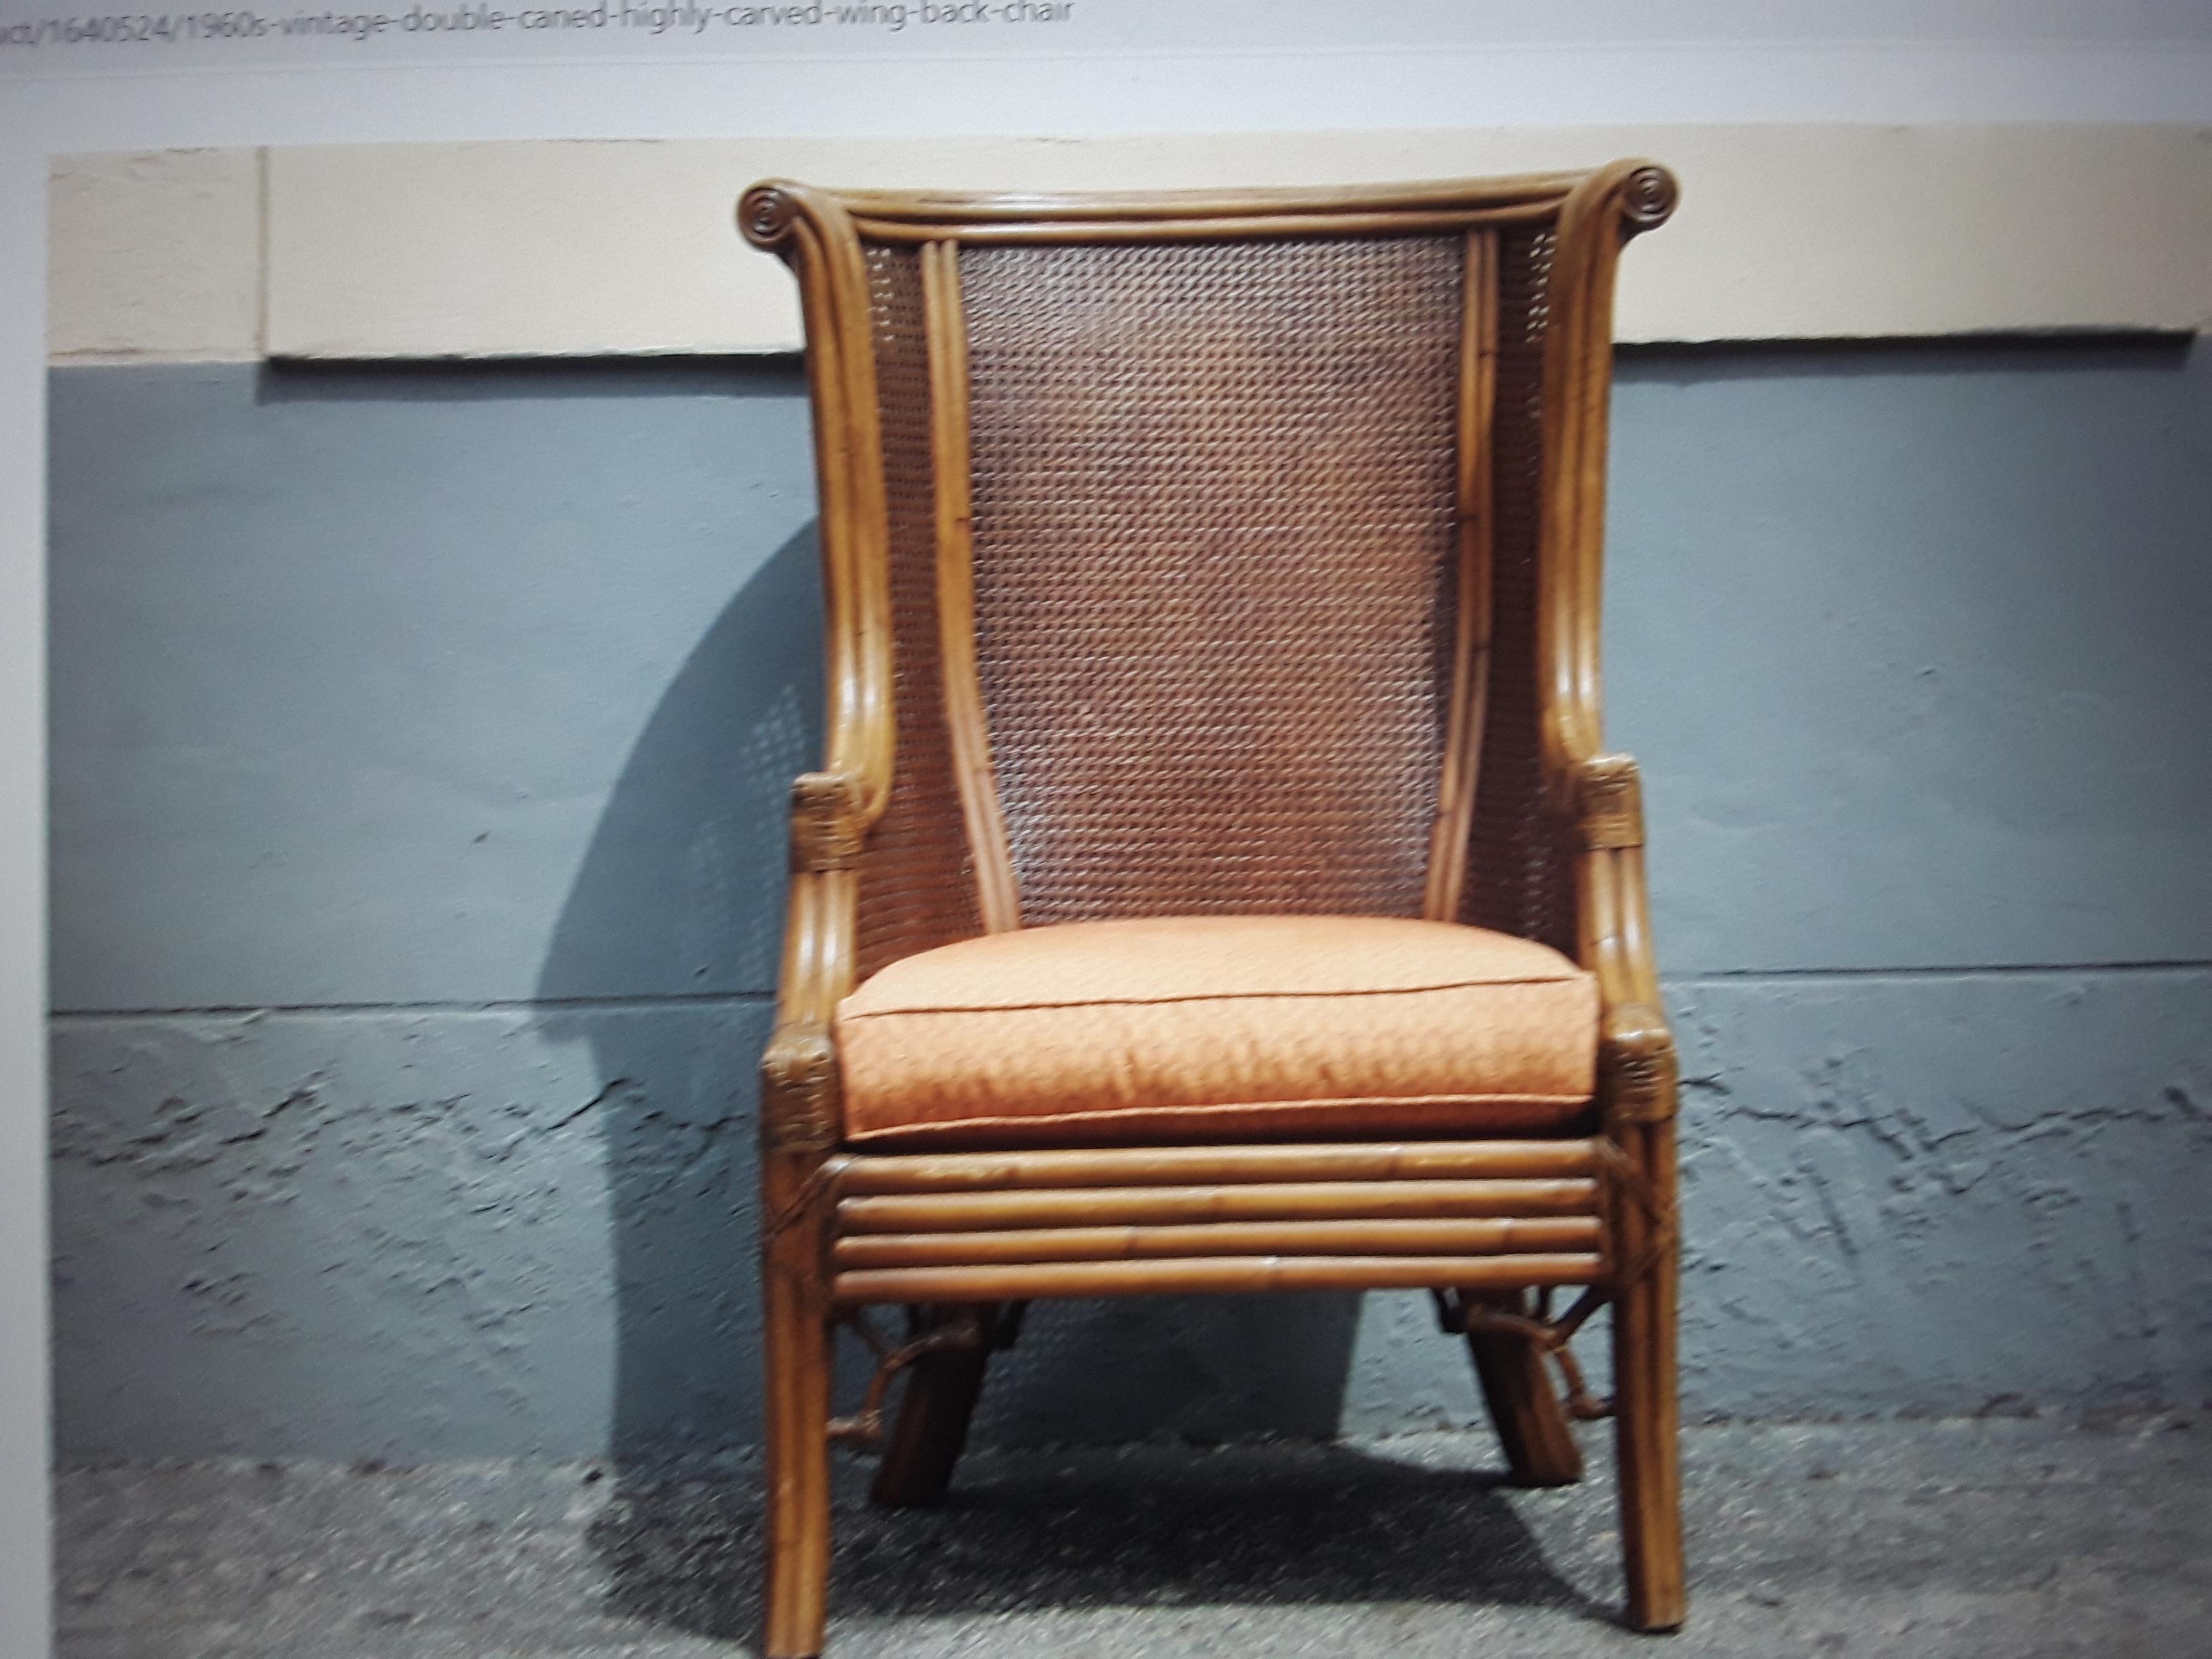 1960's Mid Century Modern Carved Faux Bamboo and Double Caned Wingback Chair For Sale 7